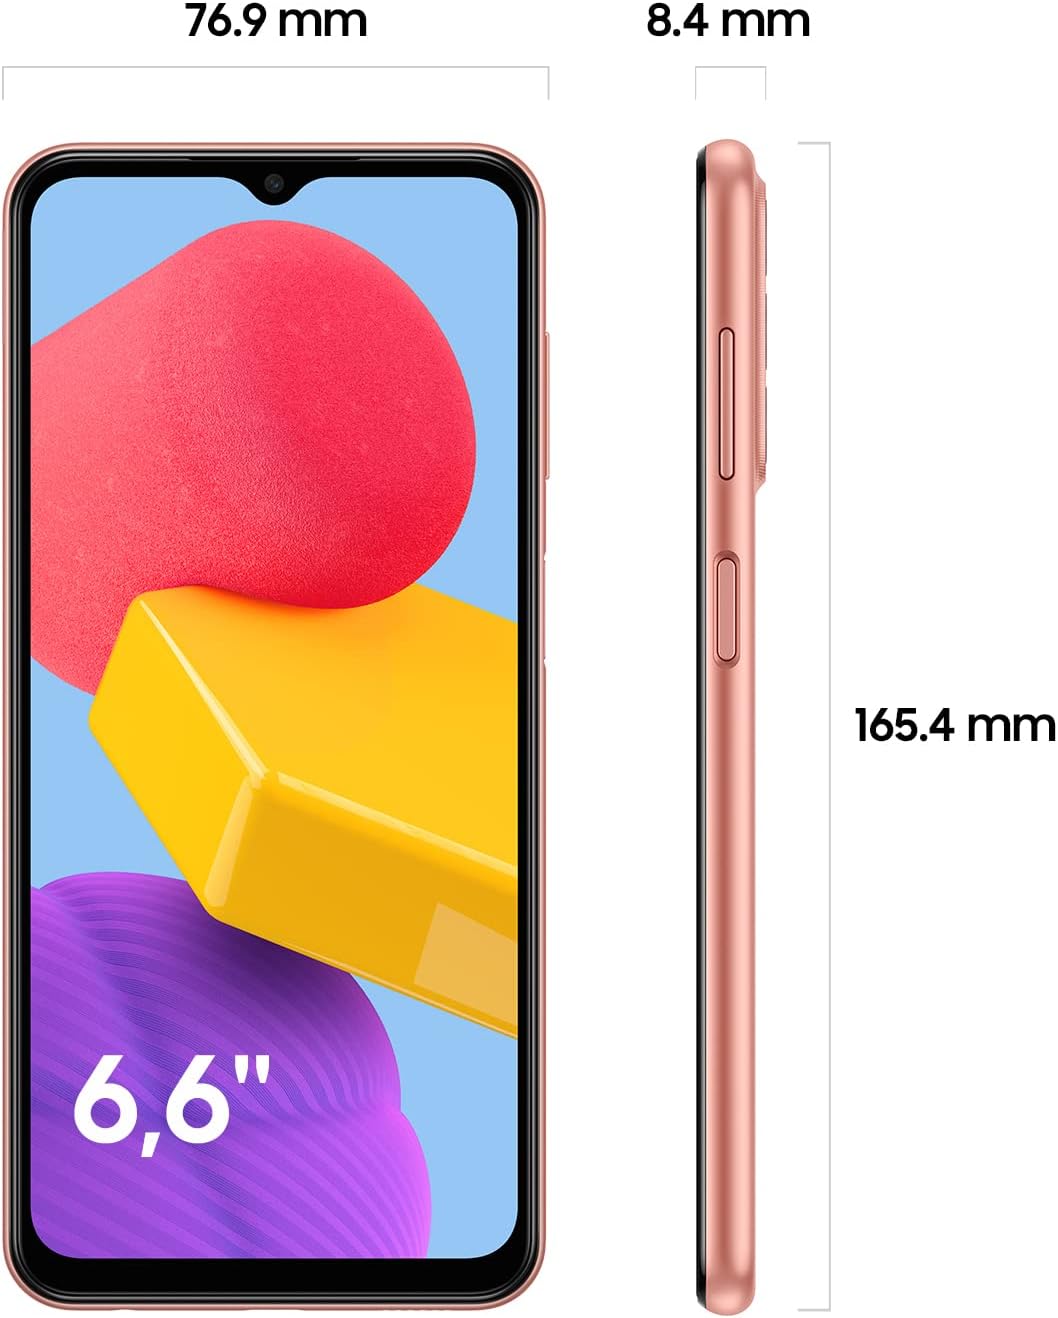 Samsung Galaxy M13 Mobile Phone SIM Free Android Smartphone 4GB RAM 64GB Storage, Orange Copper   Import  Single ASIN  Import  Multiple ASIN ×Product customization General Description Gallery Reviews Variations Additional details Pro - Amazing Gadgets Outlet